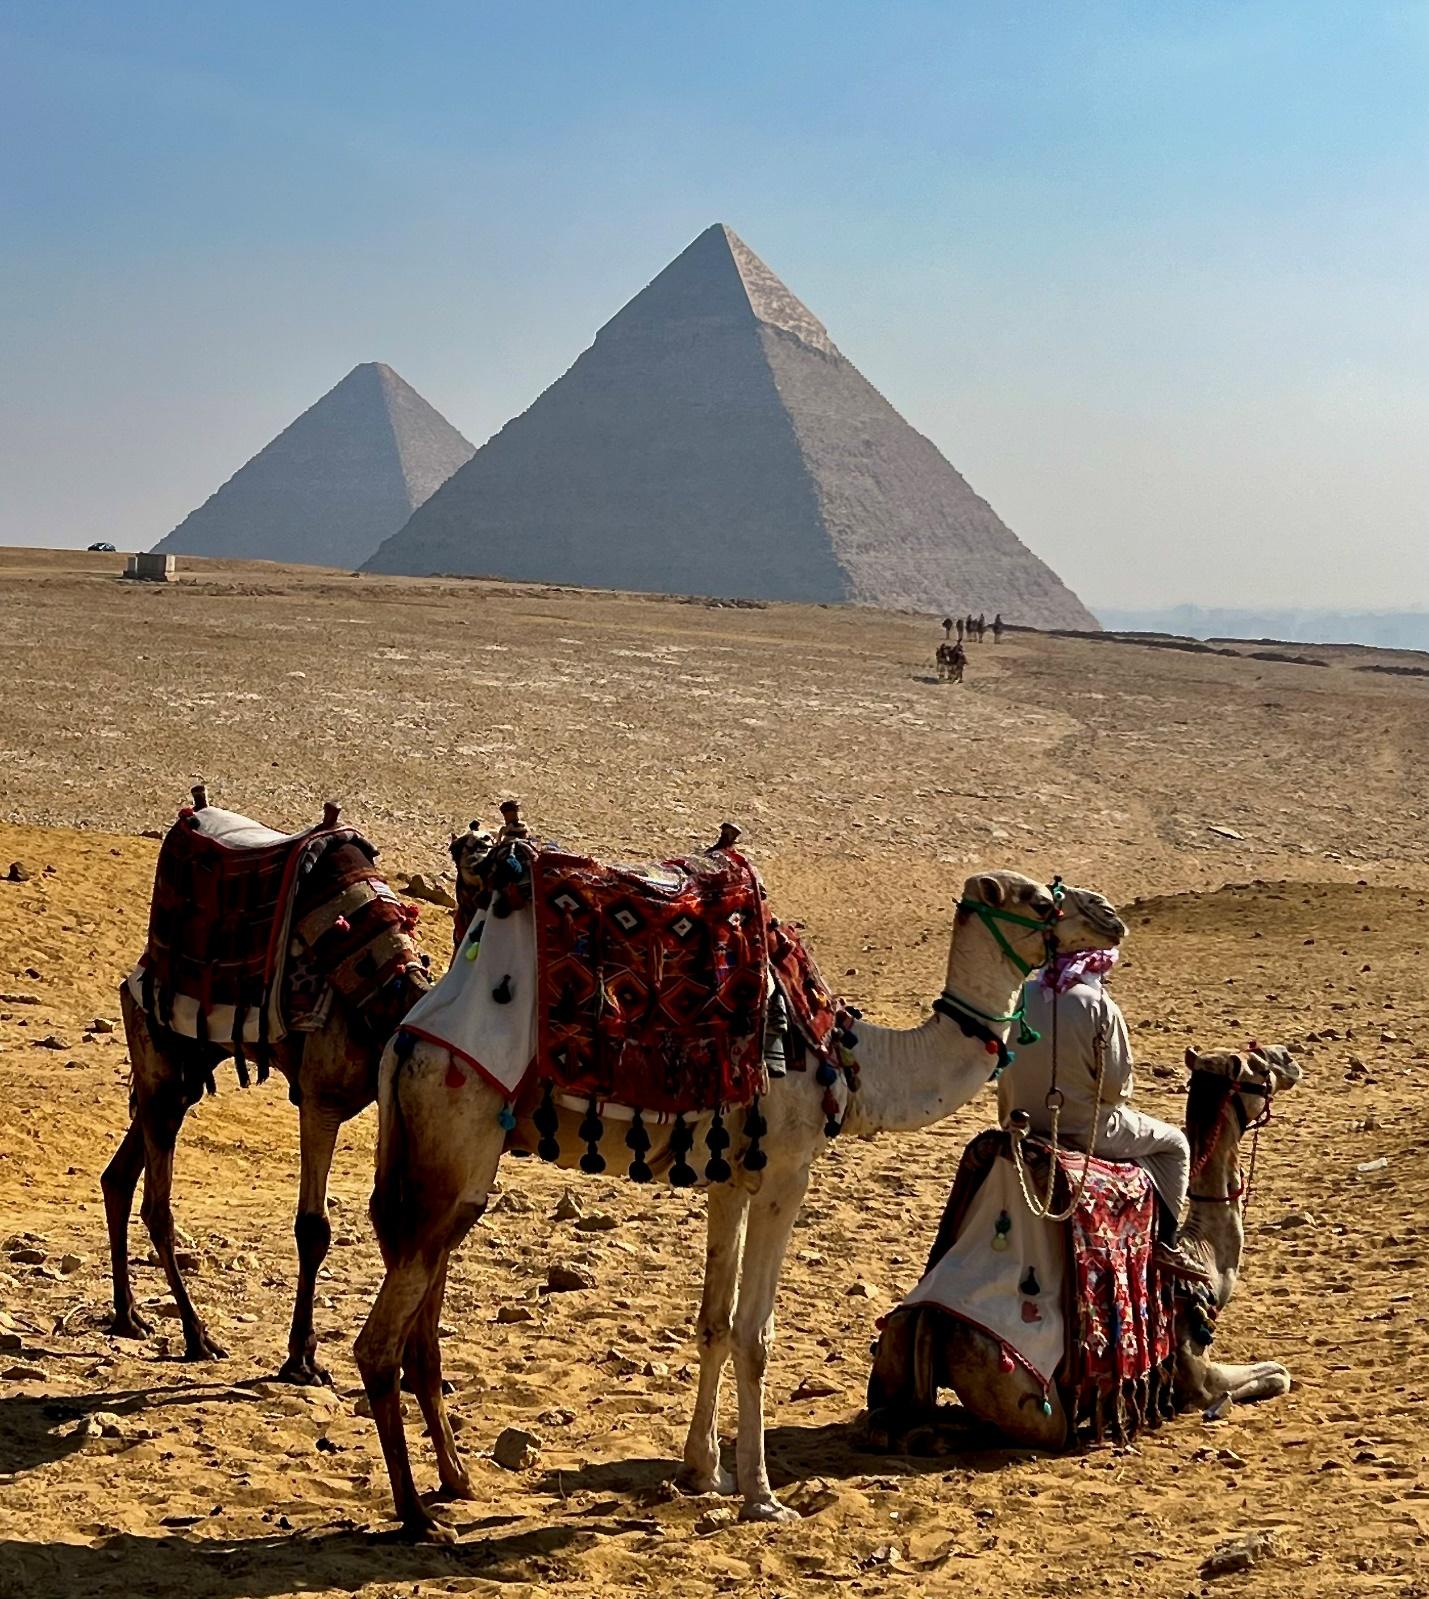 Camels in the desert with a pyramid in the background

Description automatically generated